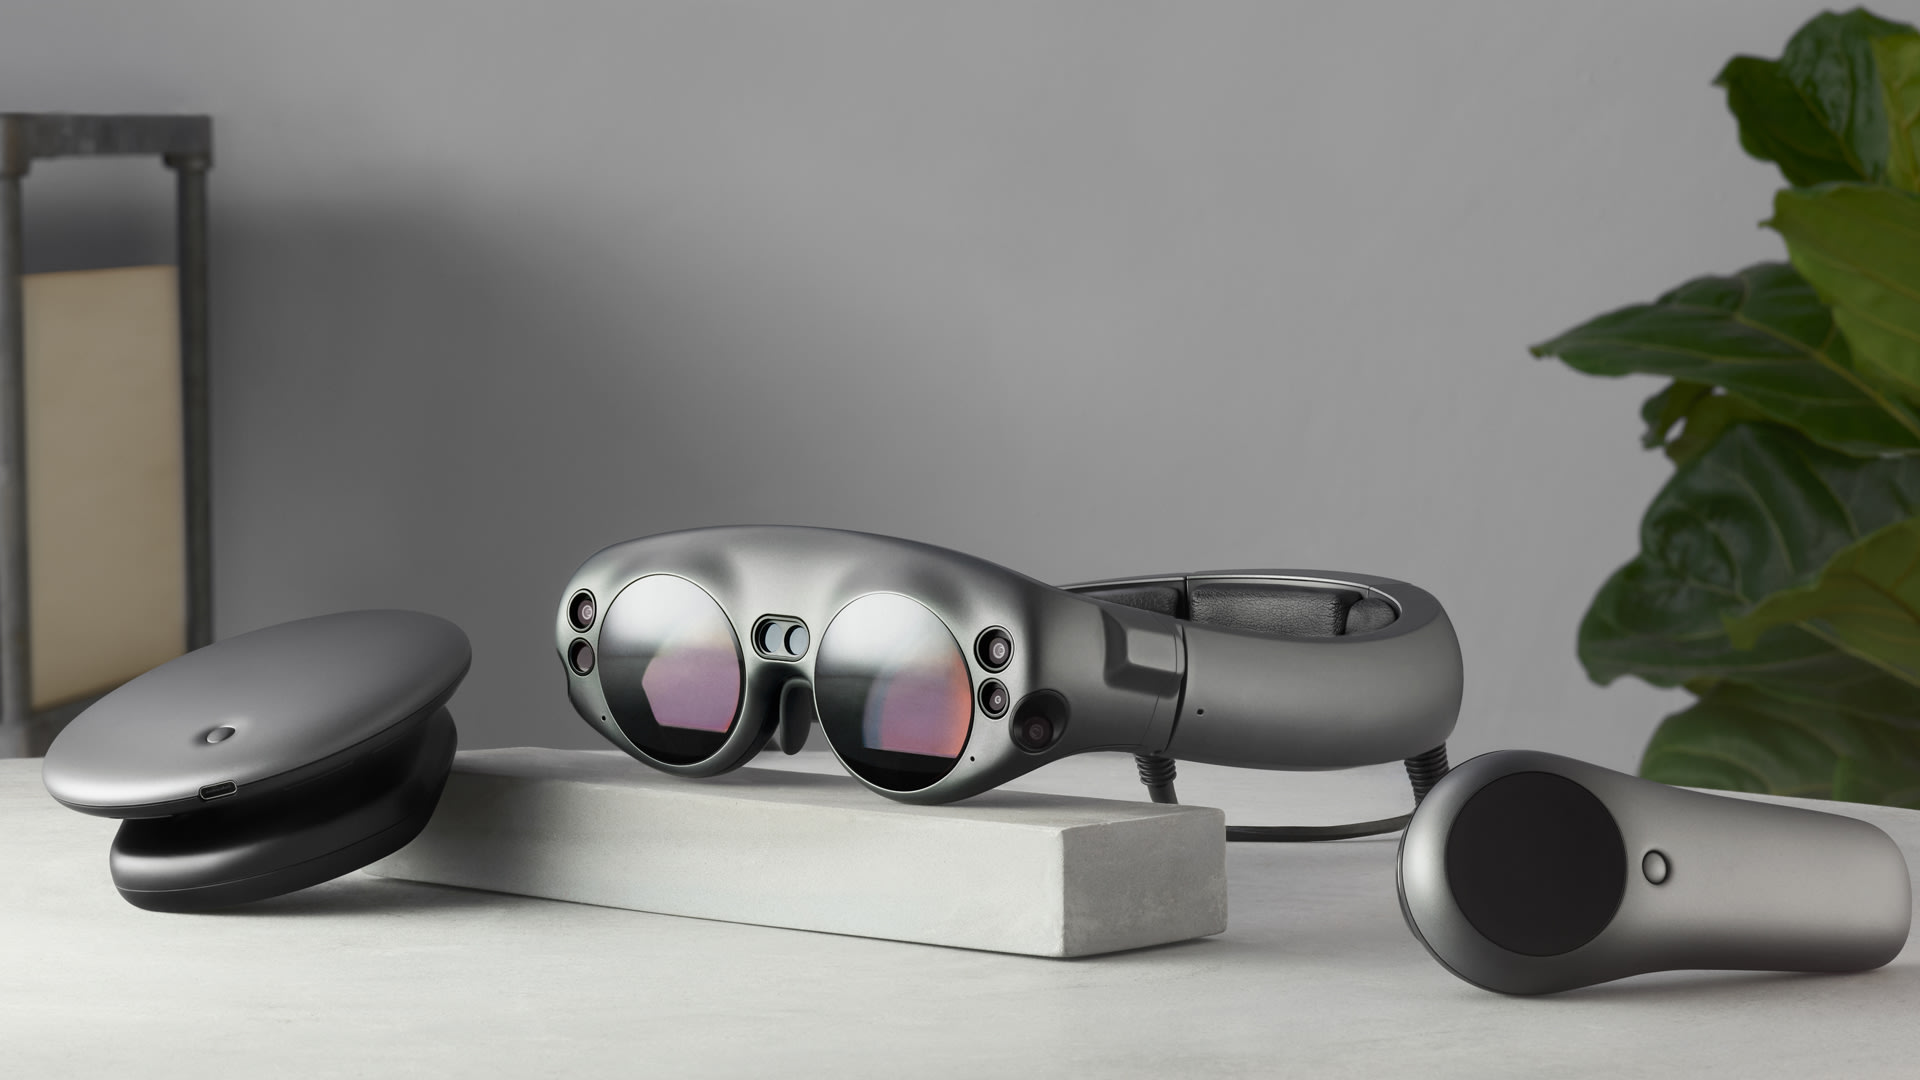 Much of the excitement and cool factor around Magic Leap is now gone